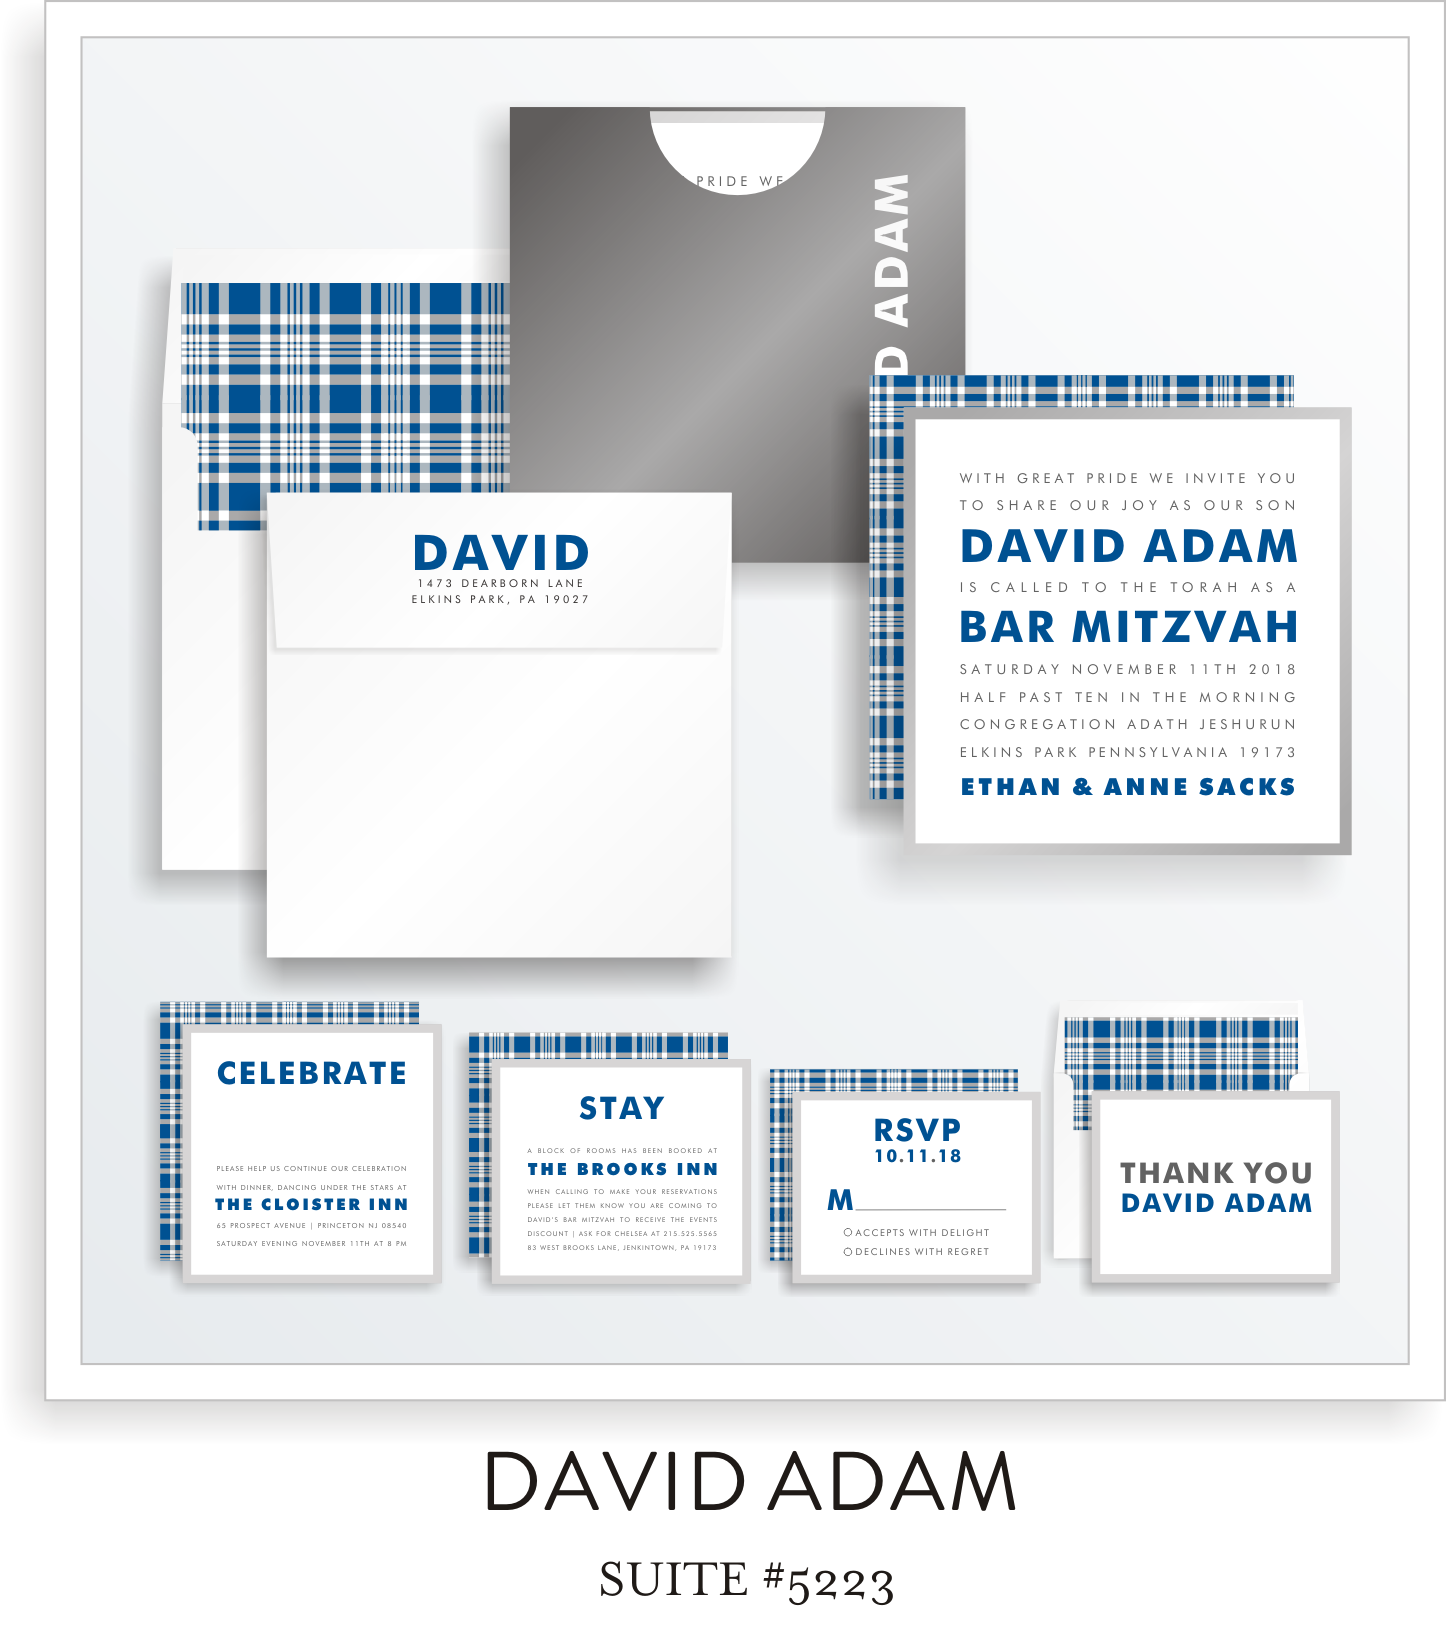 Copy of <a href=/bar-mitzvah-invitations-5223>Suite Details→</a><strong><a href=/david-adam-in-colors>see more colors→</a></strong>